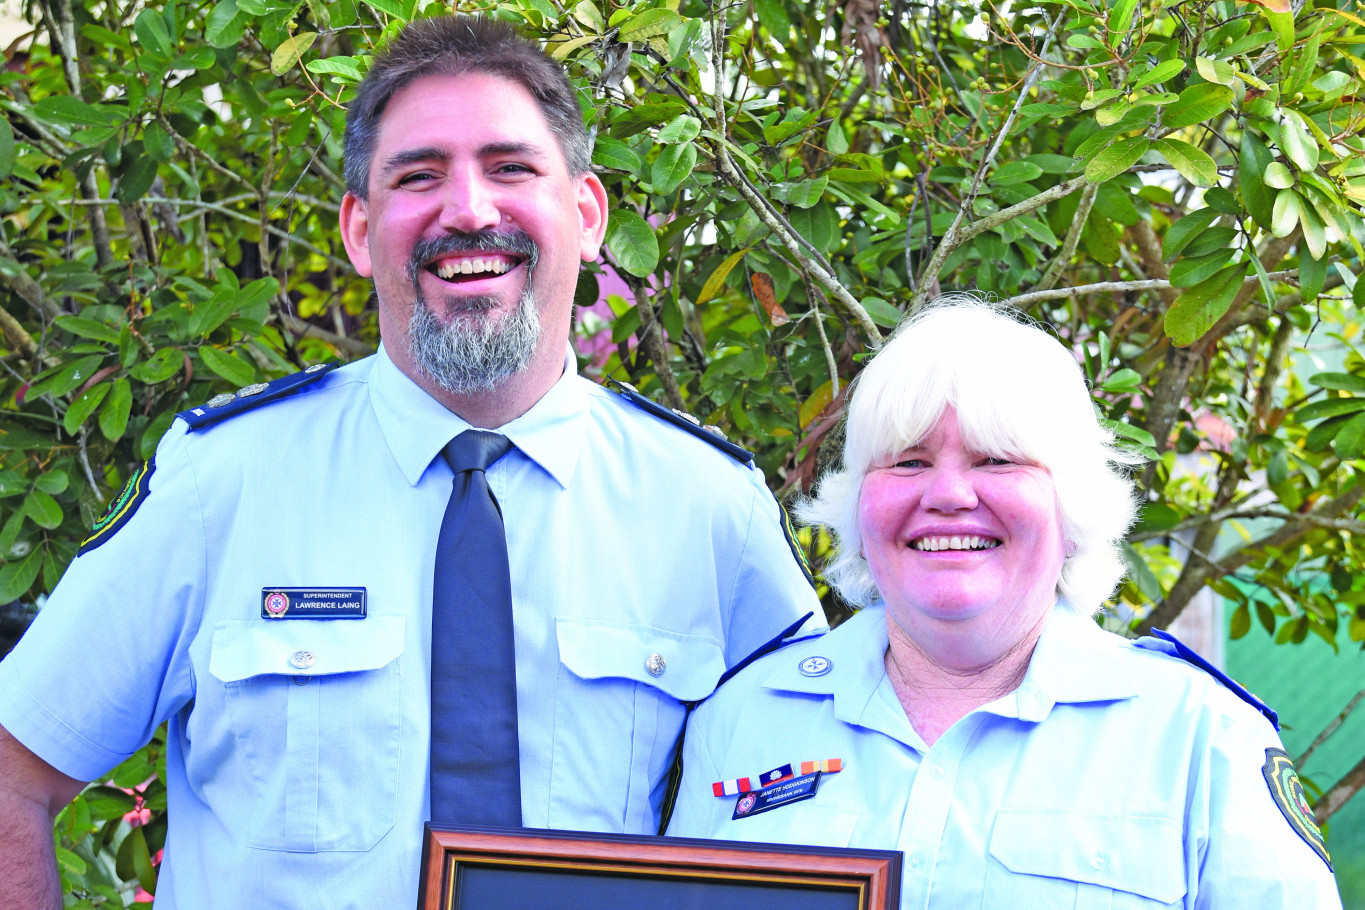 RFS Regional Manager Far Northern Region Lawrence Laing presented Irvinebank Rural Fire Service volunteer of the year award to Jeanette Hodgkinson.